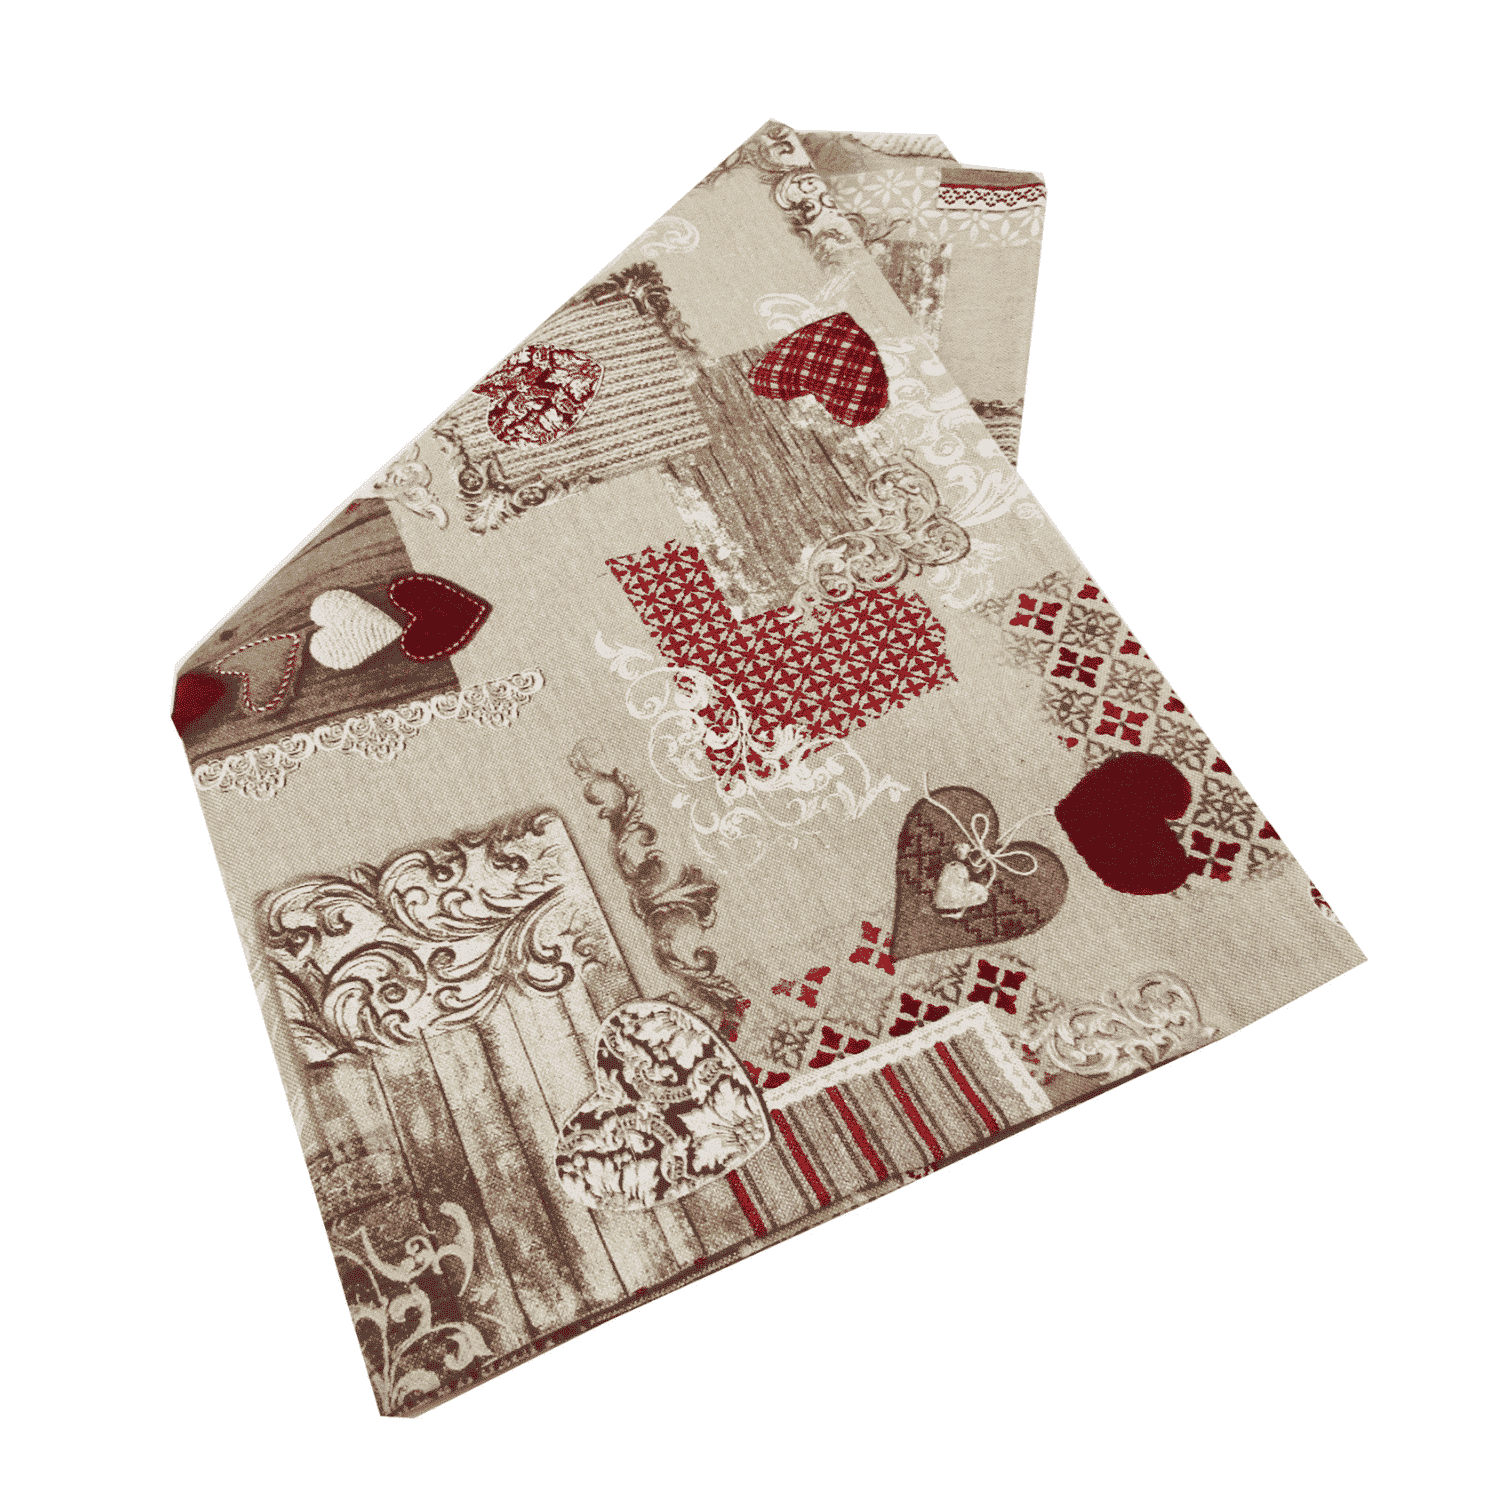 out-tovaglia-cotone-stampata-miros-made-in-italy-margot-rosso-shabby-chic-patchwork-cuori-rossi-beige